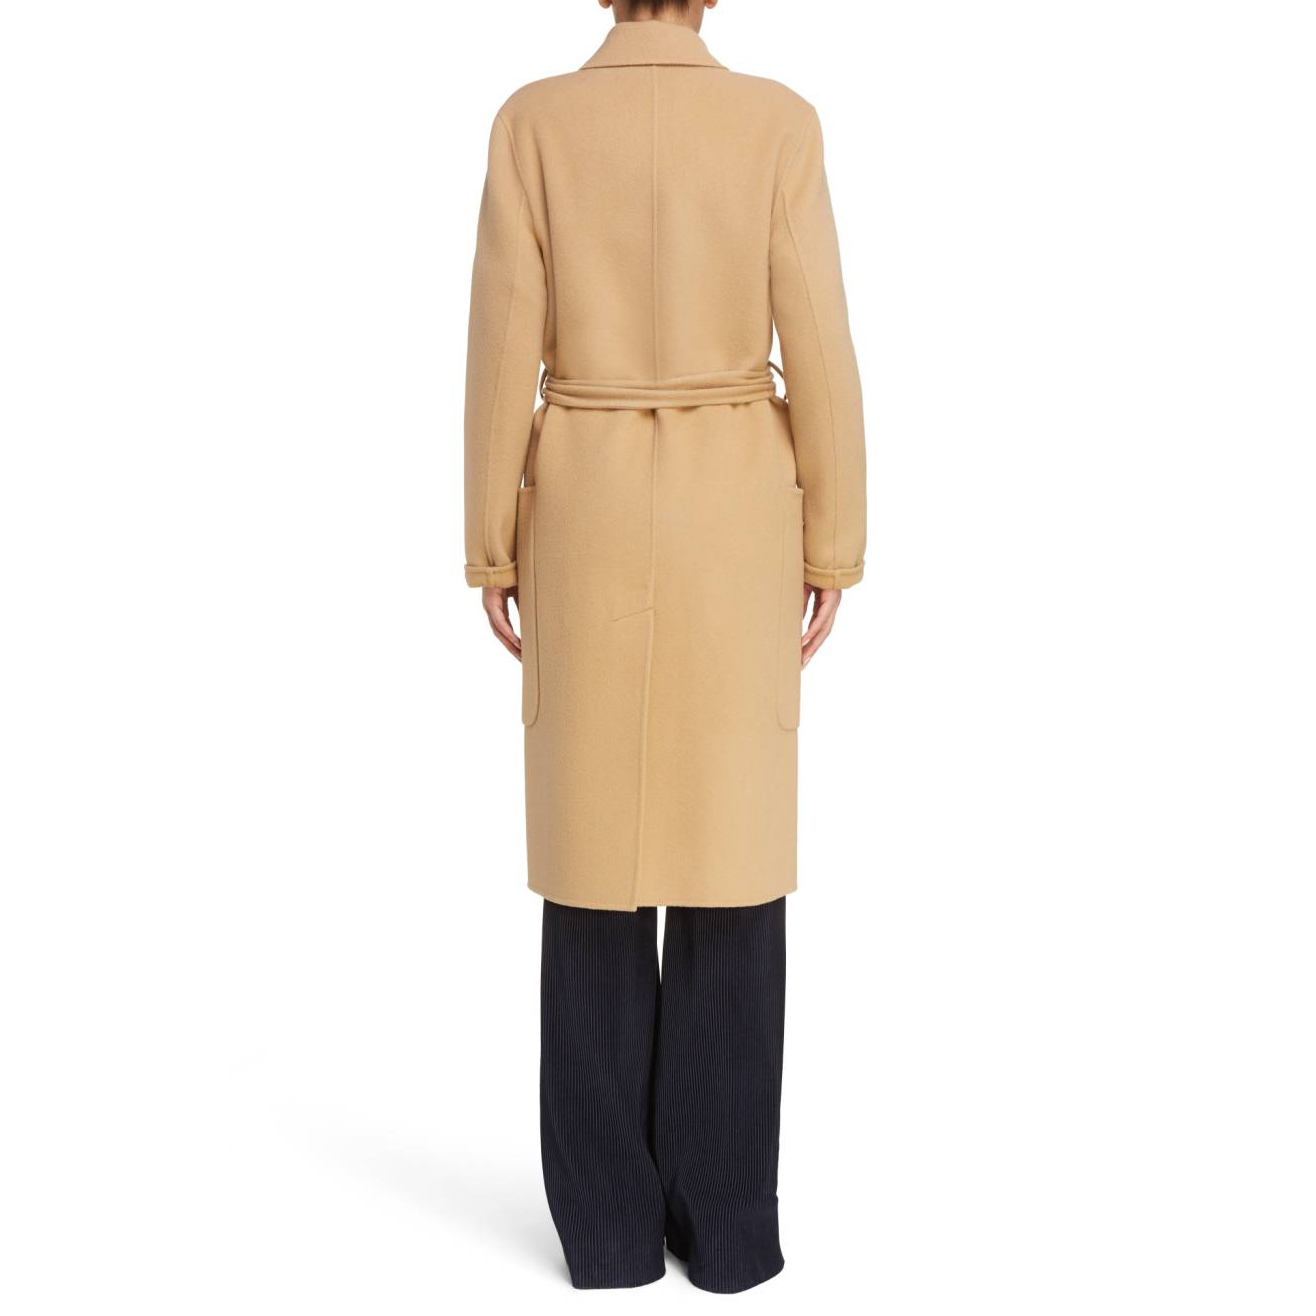 Acne Studios Carice Double Breasted Coat